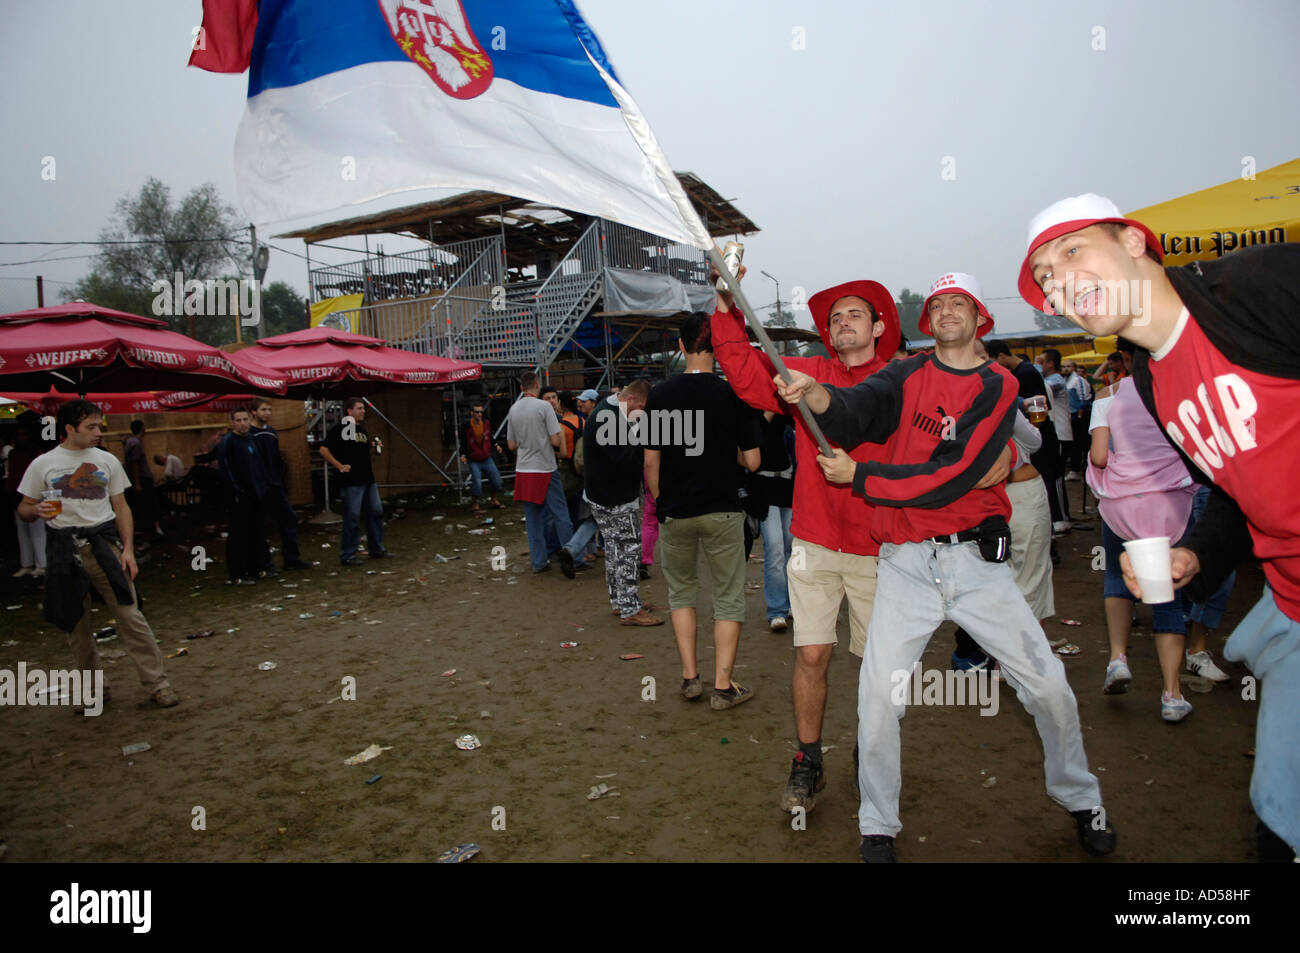 Balkan Brass Bands Music Festival Guca / Serbia 2005, man waving with the Serbian flag Stock Photo